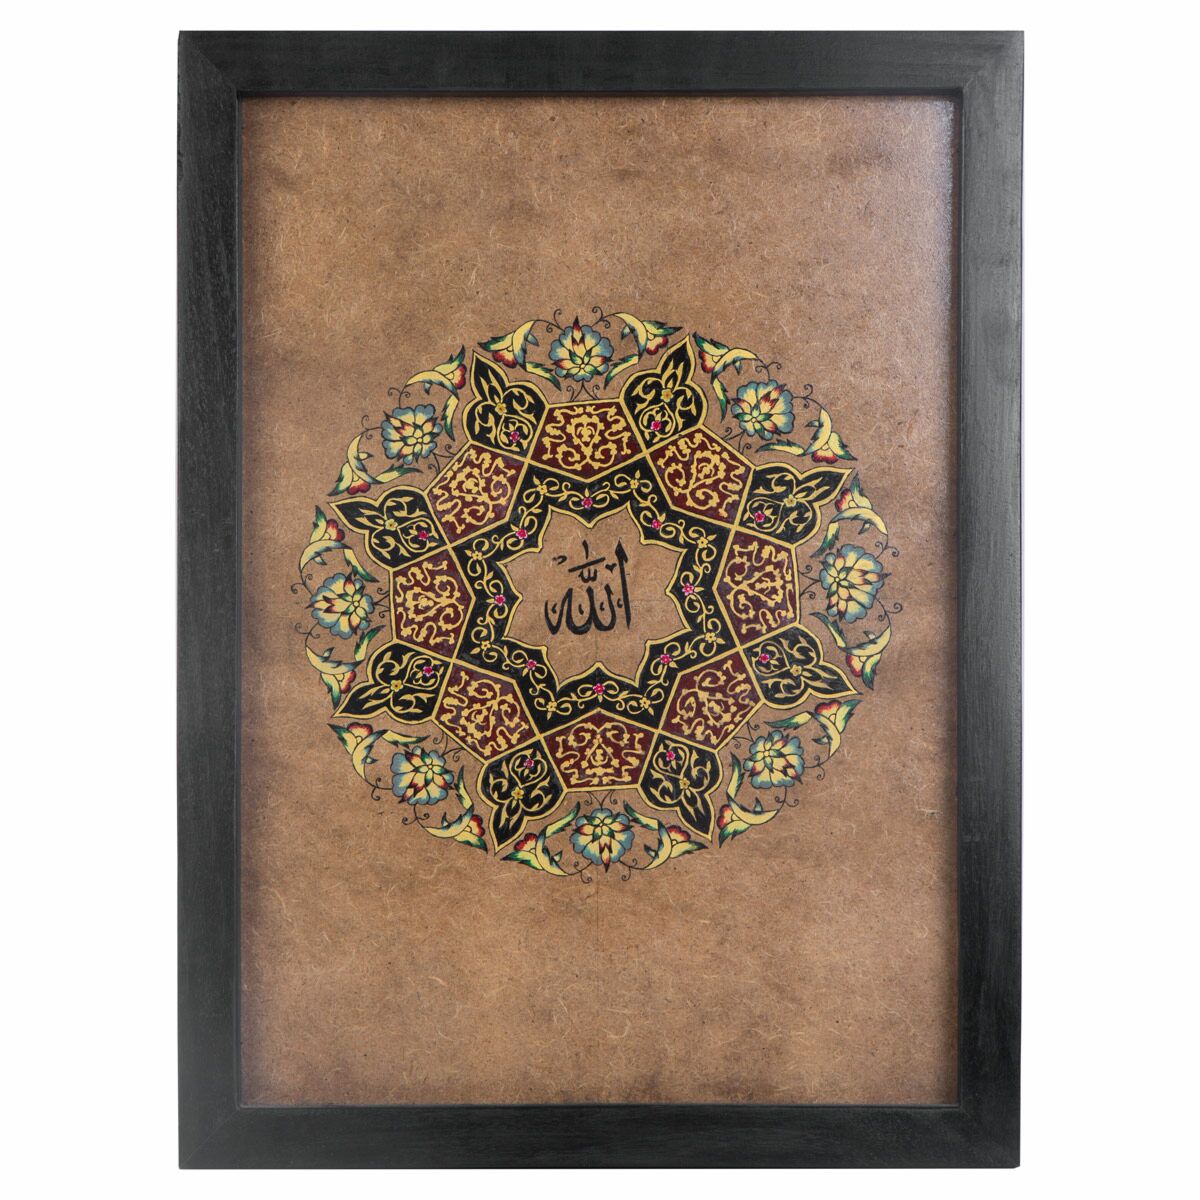 Miniature of Allah's Name on Wooden Tableau | Wooden Islamic Tableau